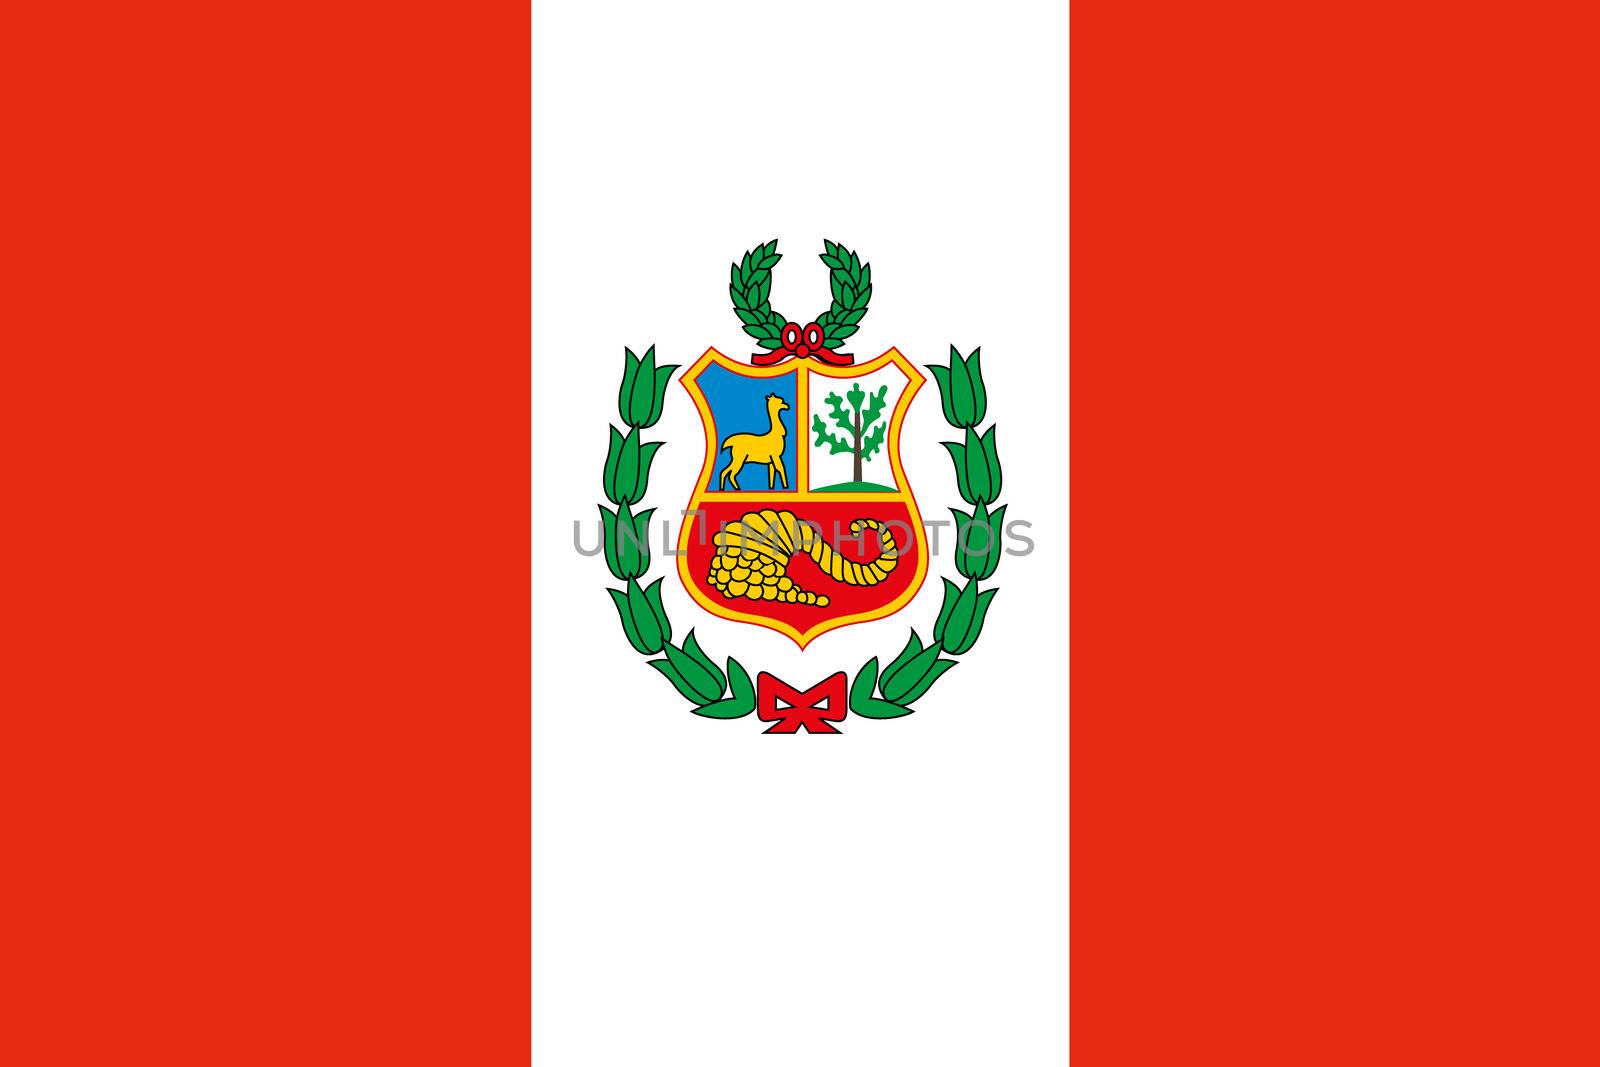 An illustration of the flag of Peru